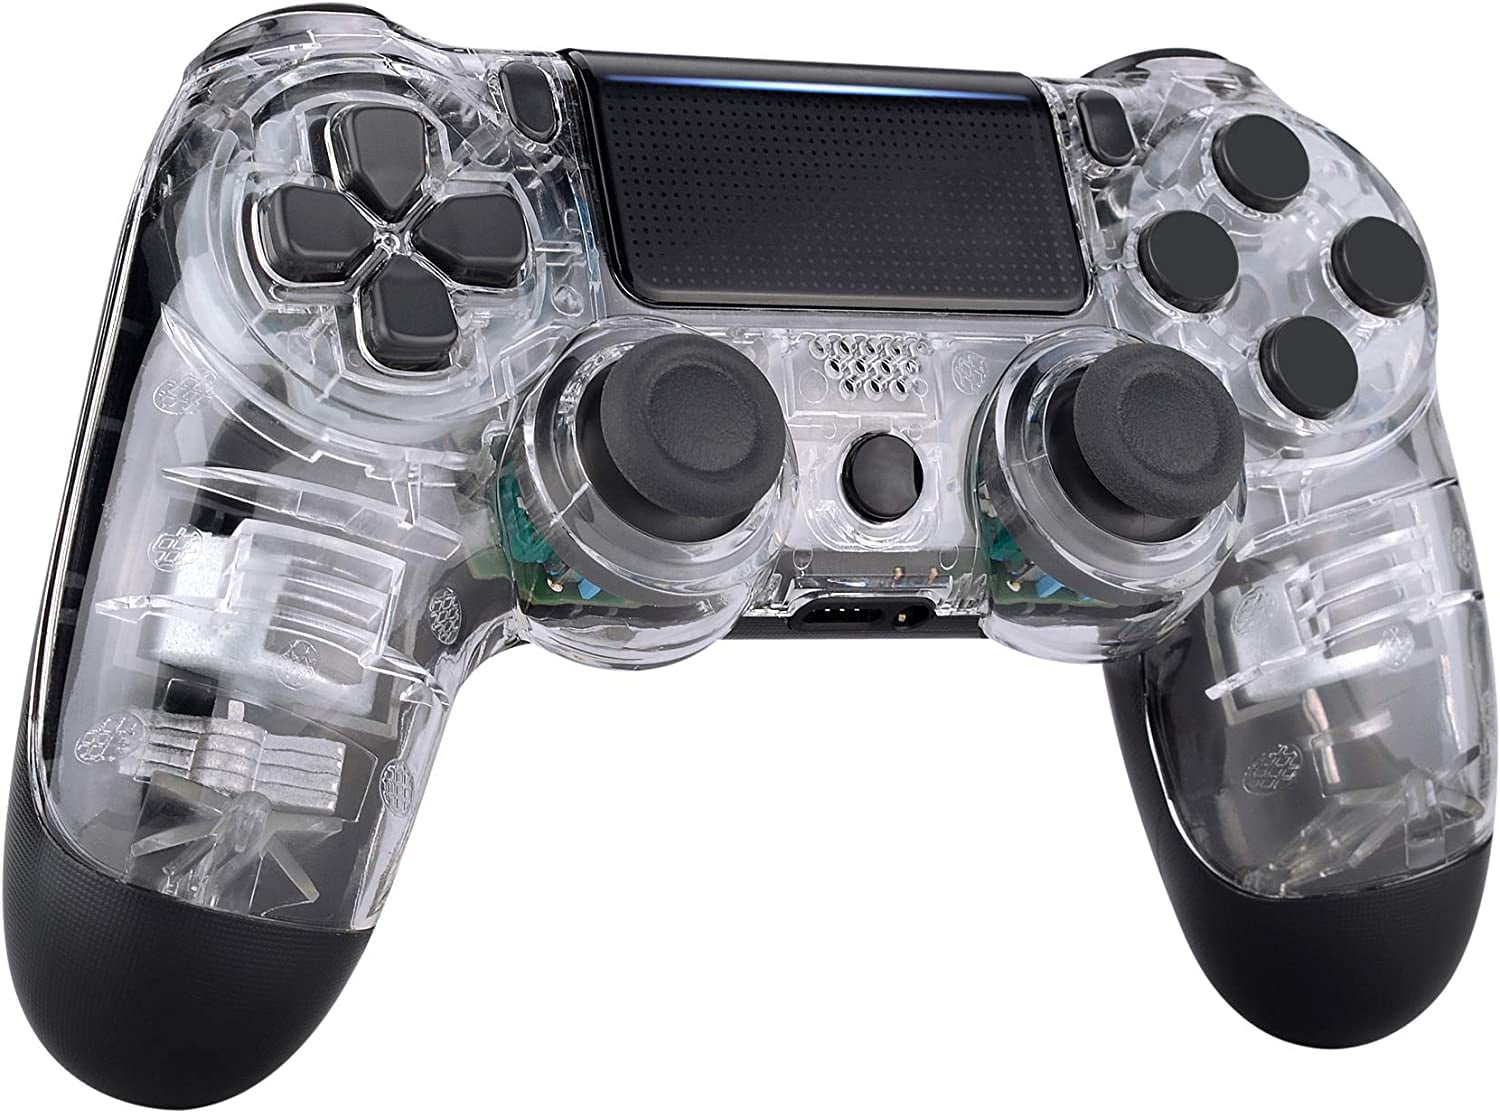 ps3 cfw rebug full ps4 controller compatibility